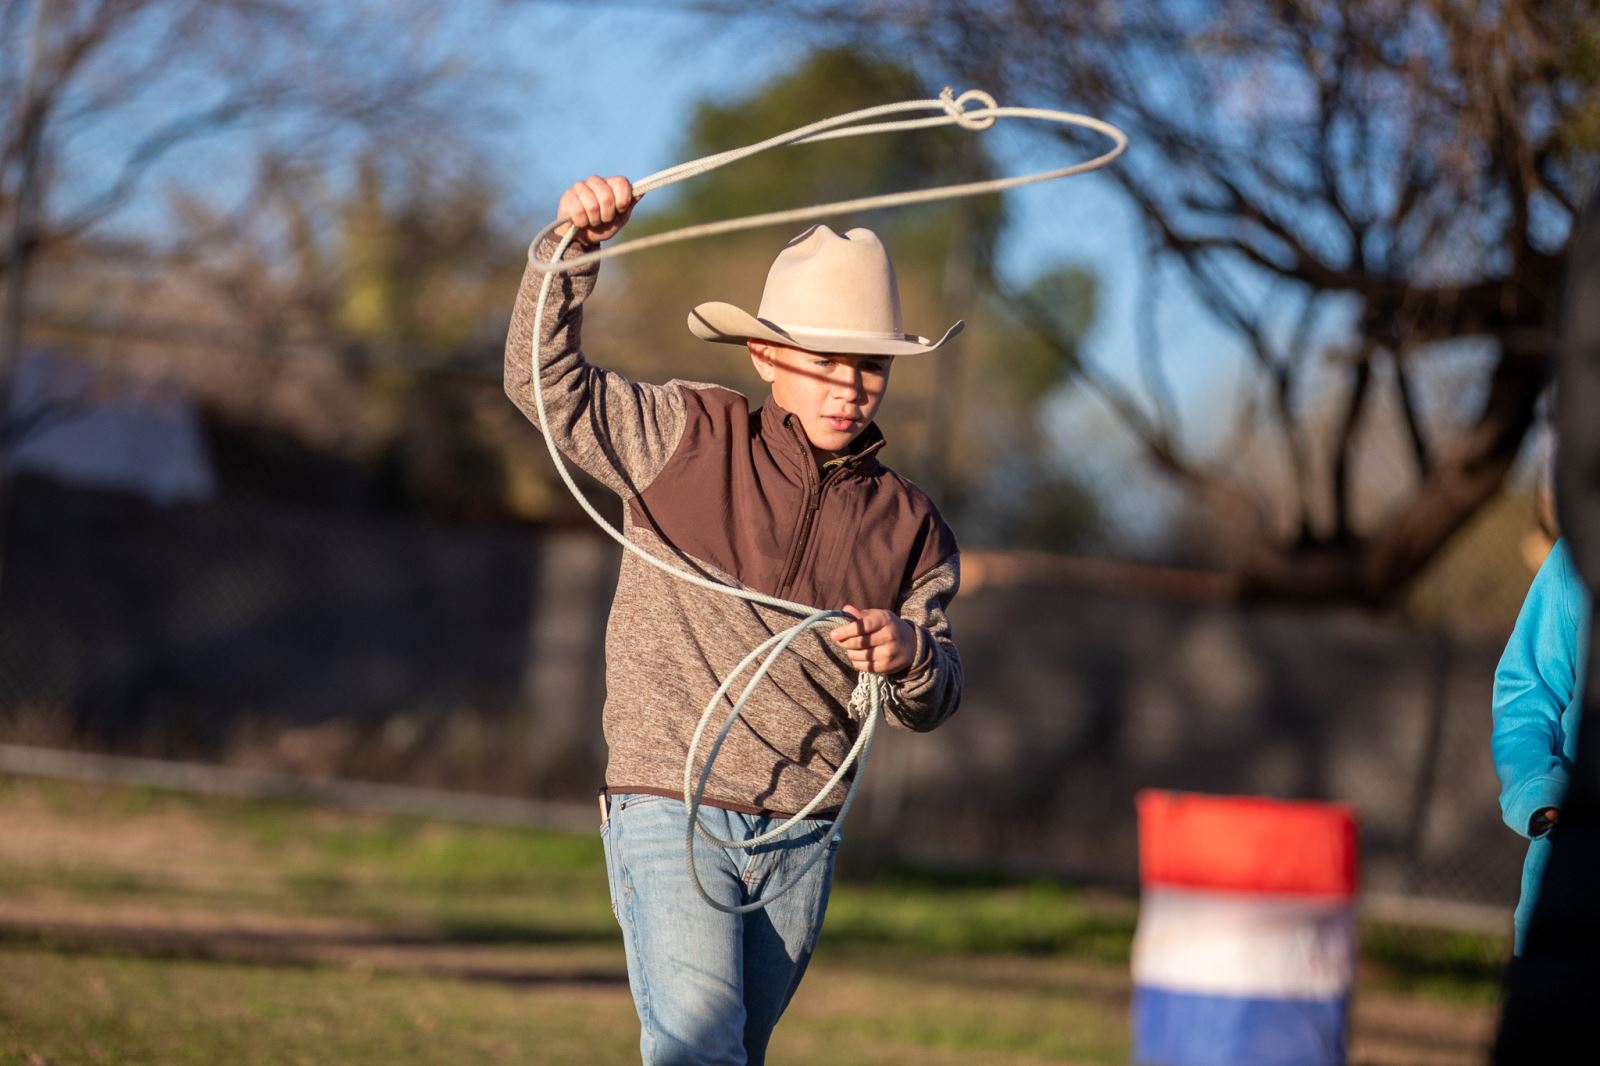 A boy in a cowboy hat practices his lassoing skills